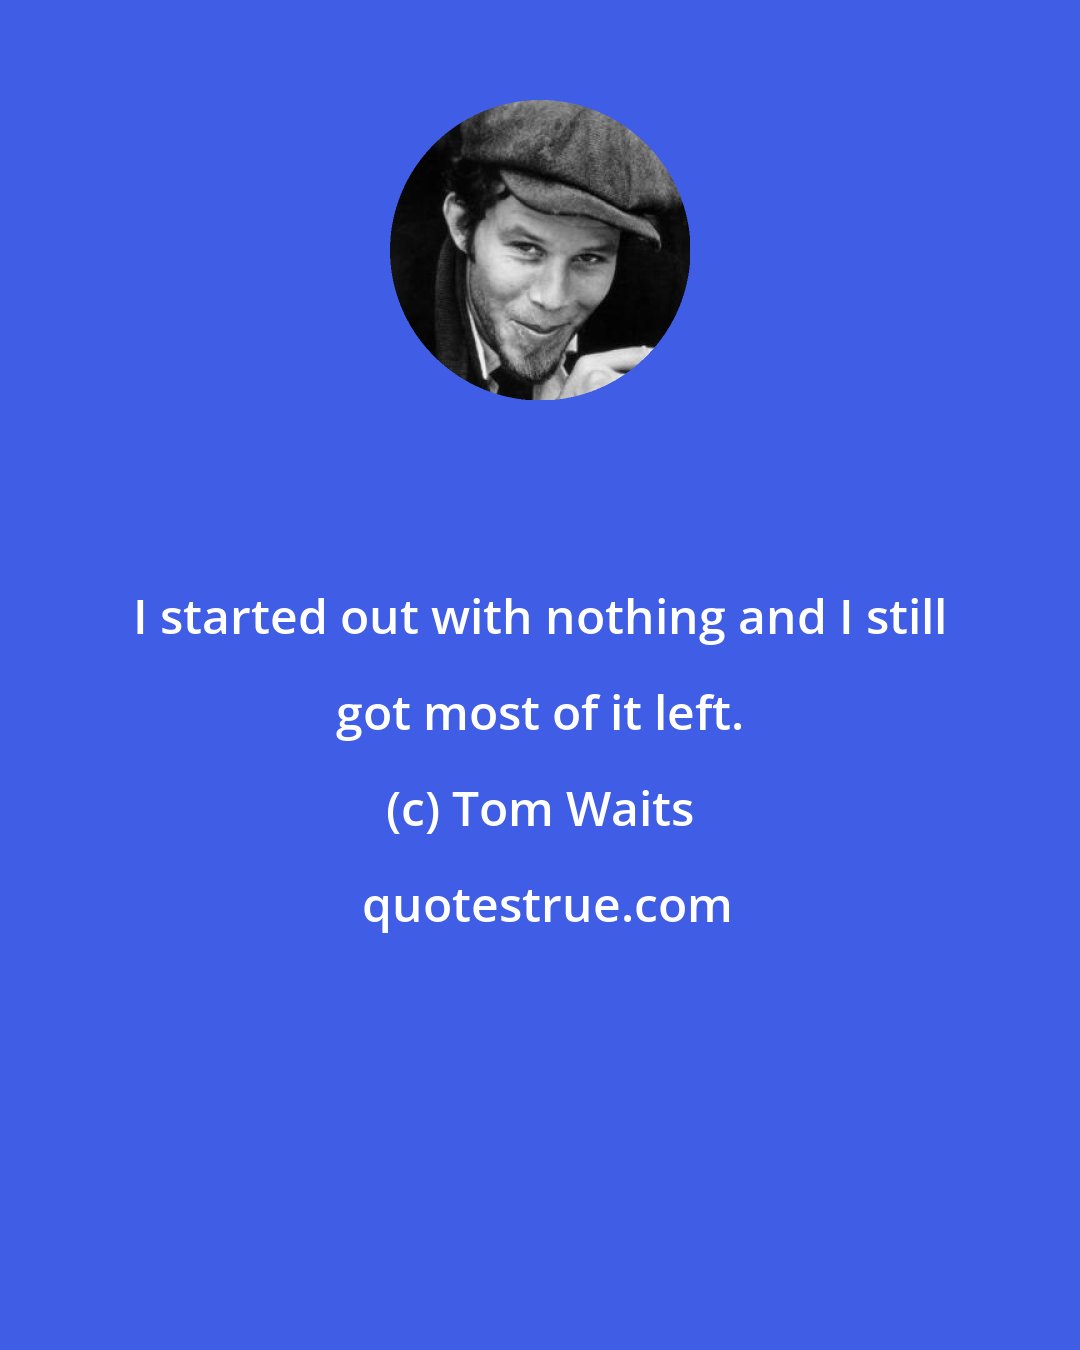 Tom Waits: I started out with nothing and I still got most of it left.